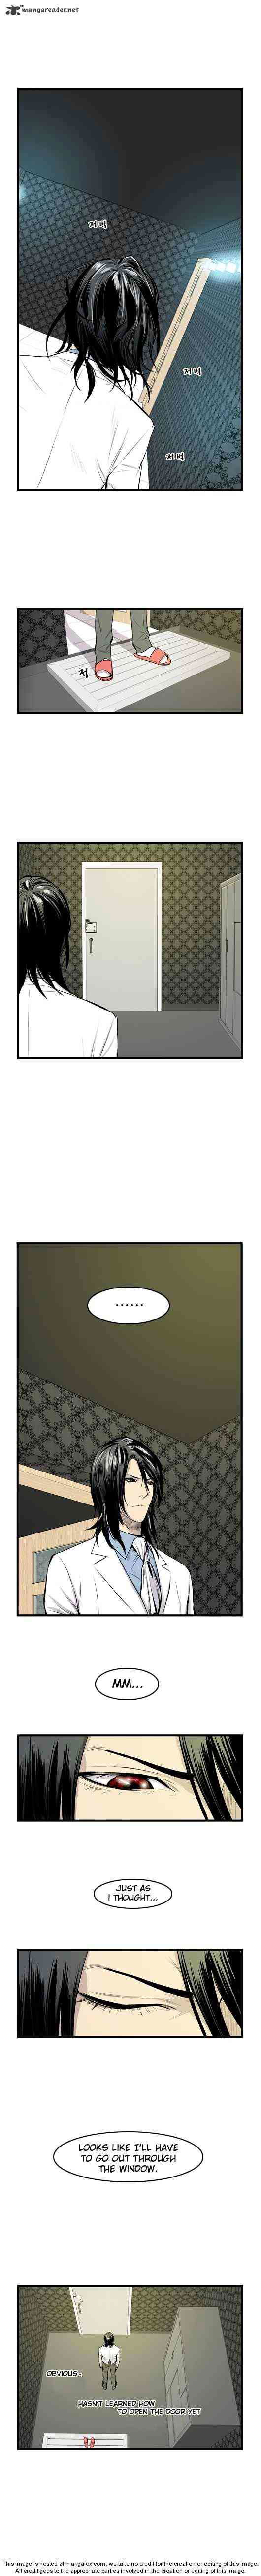 Noblesse Chapter 31 _ Chapters 31-45 page 90